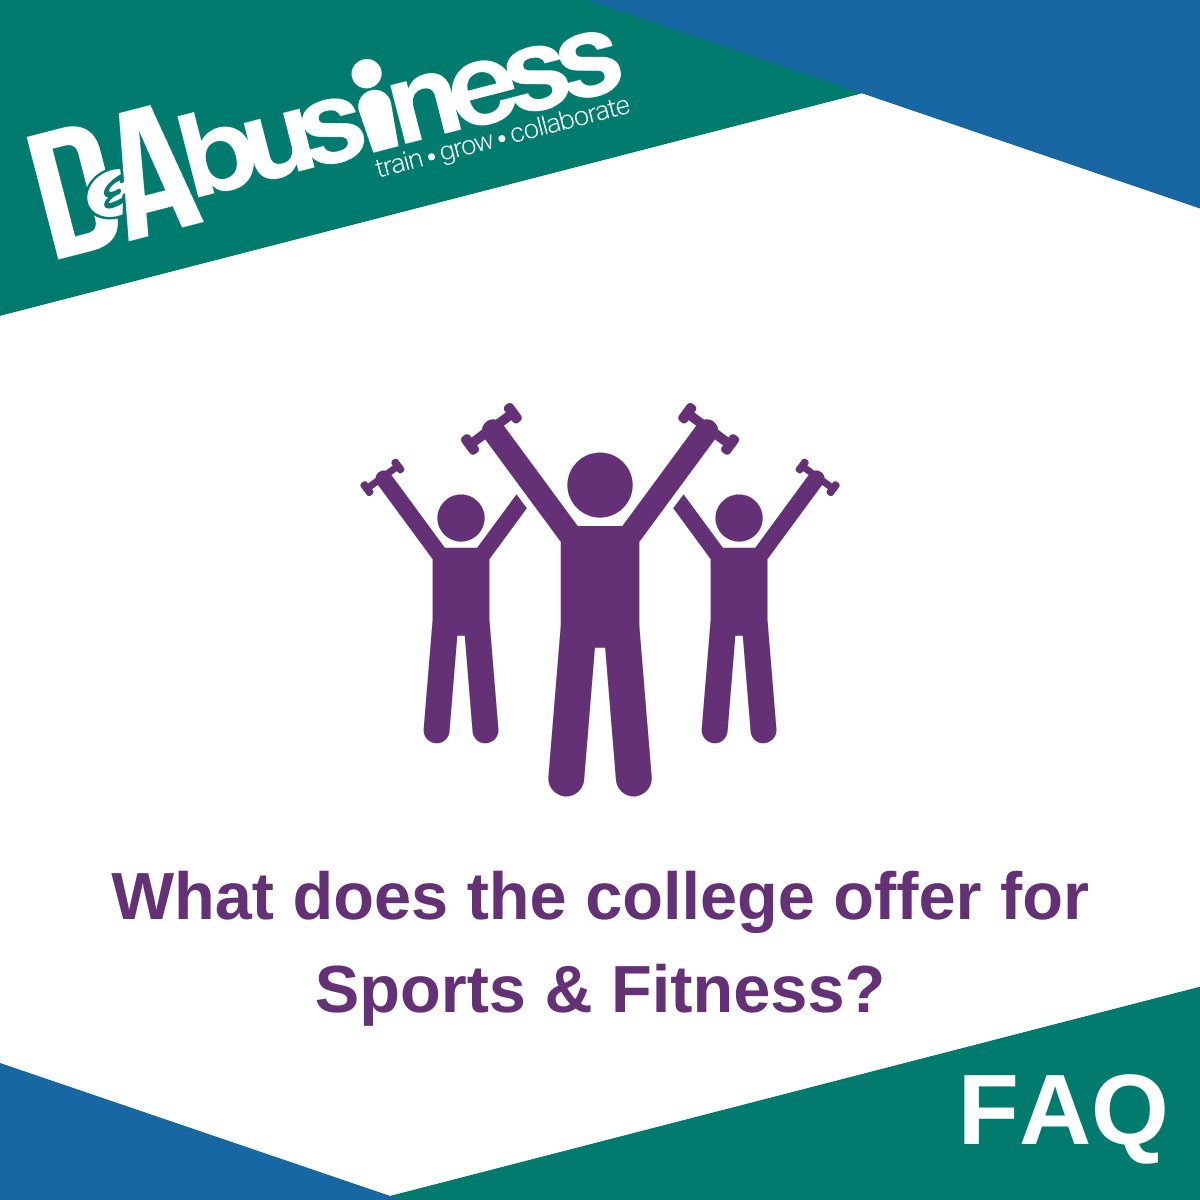 Are you a business operating in Sports & Fitness? 🤔 Here at @dundee_angus, we offer a sector-leading curriculum pathway in Sports and Fitness to upskill your employees. Find out more here ⬇️ pulse.ly/vf807v2zzs #DABusiness #upskilling #sportstraining #fitnesstraining